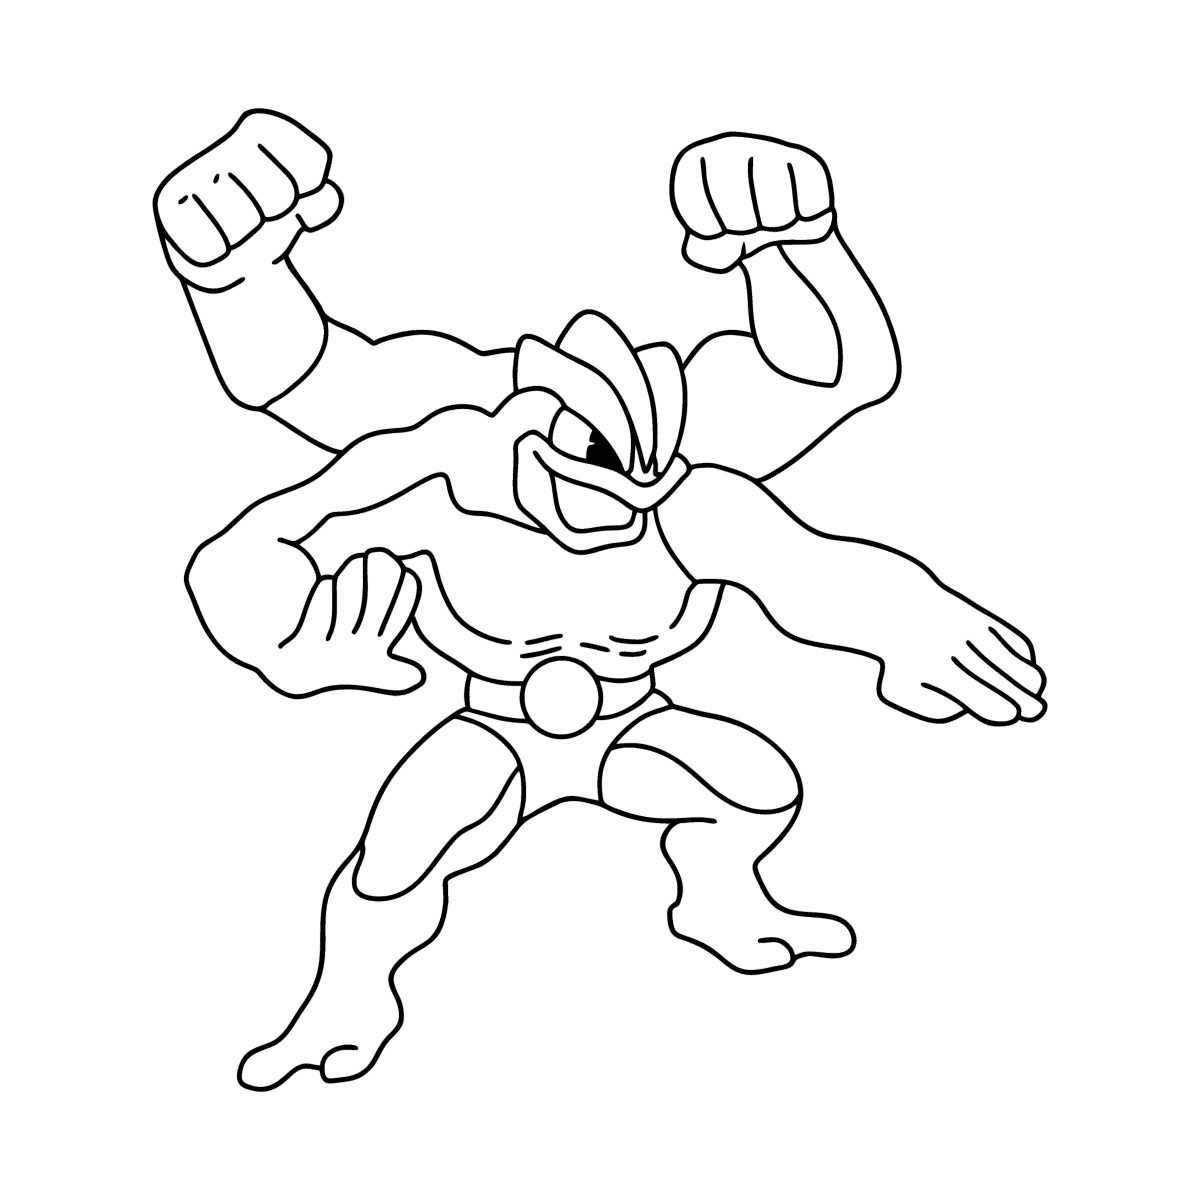 Coloring page Pokemon Go Machamp ♥ Online and Print for Free!